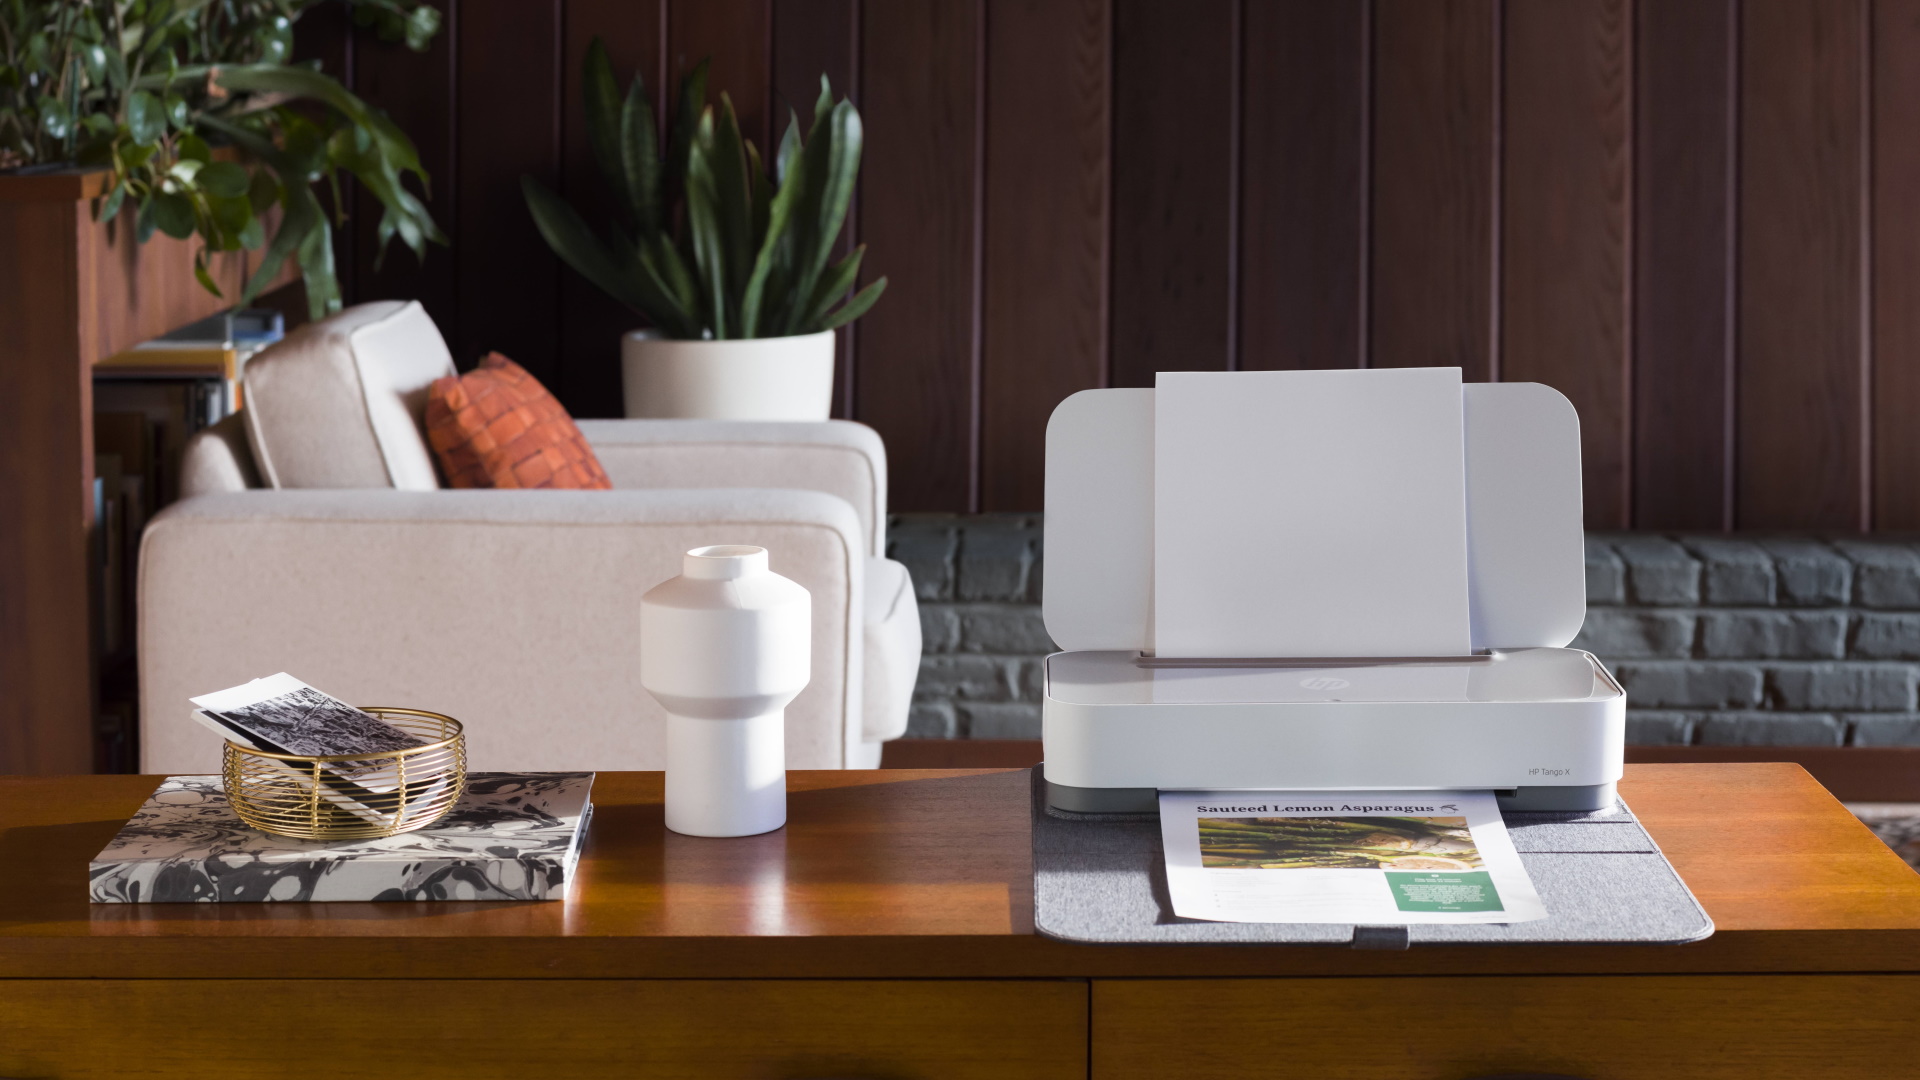 Best small printer 2021: the best compact printers for home | Real Homes